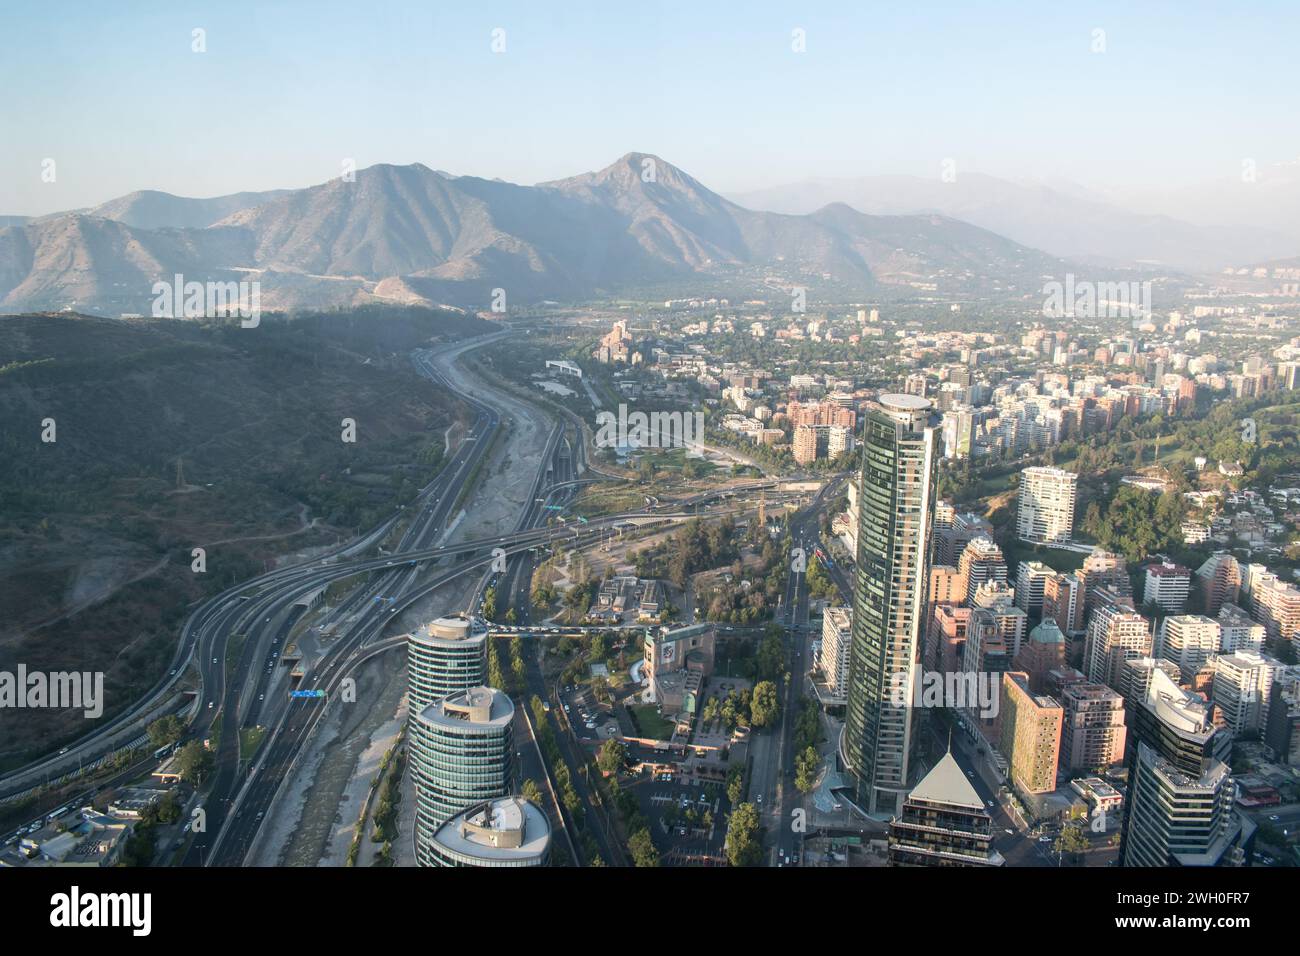 Panoramic view of Autopista Costanera Norte, Manquehue Hill Range, and Vitacura District in Santiago, Chile. Stock Photo